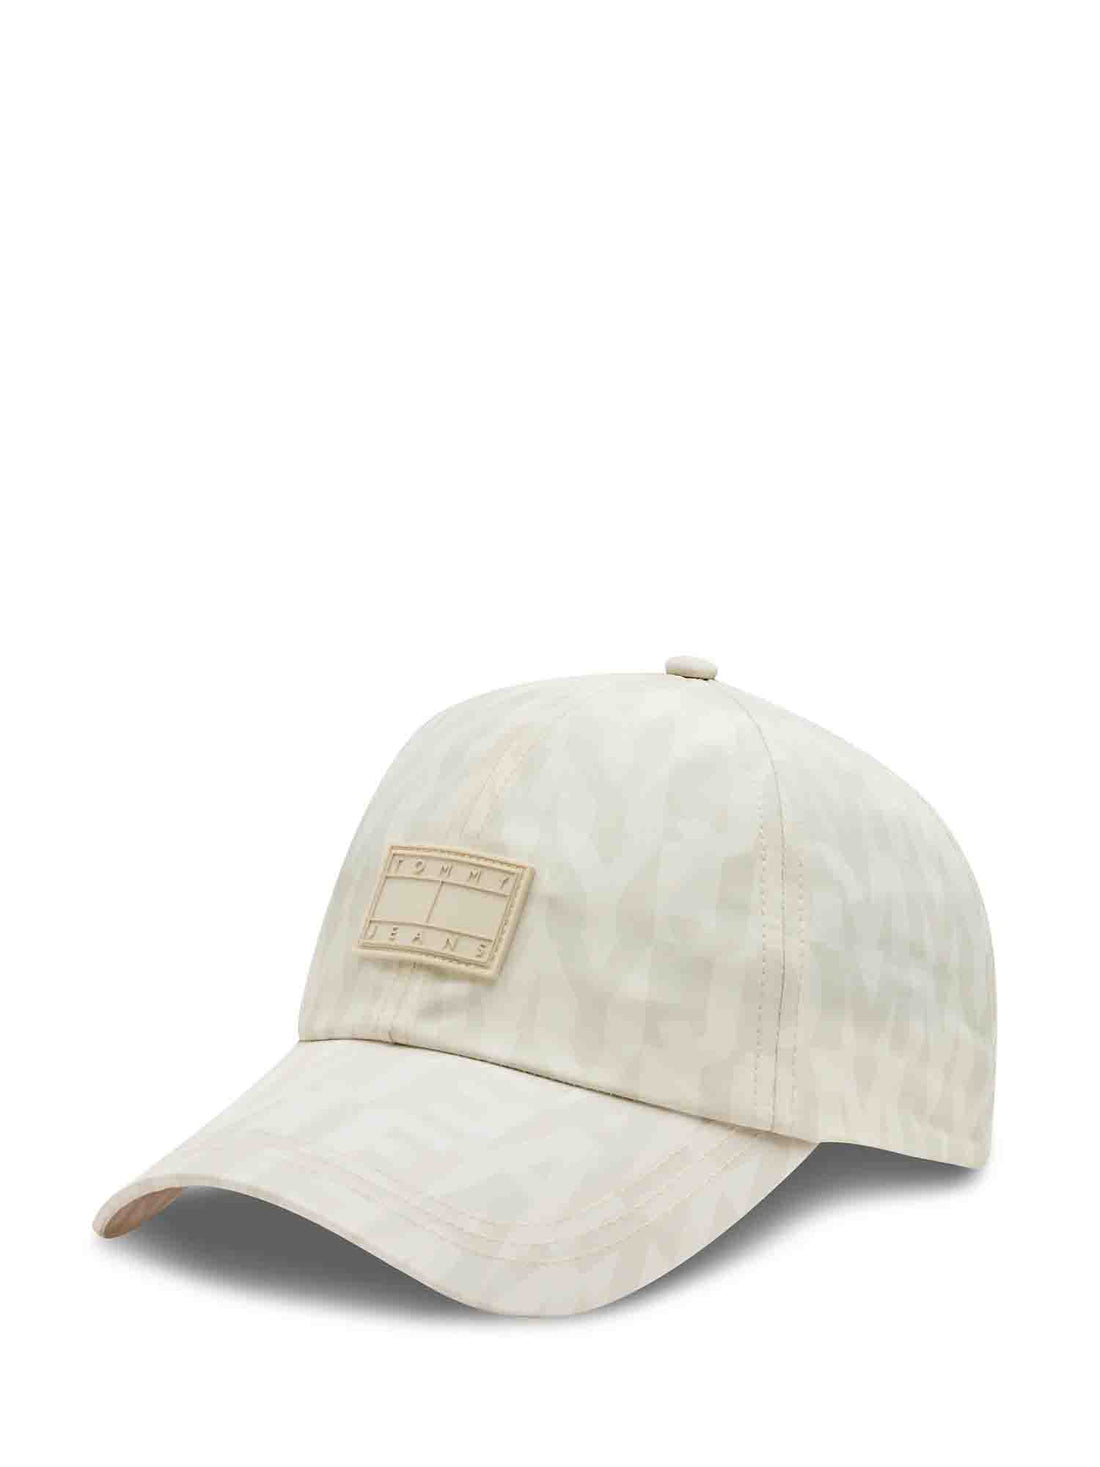 Cappelli Avorio Tommy Hilfiger